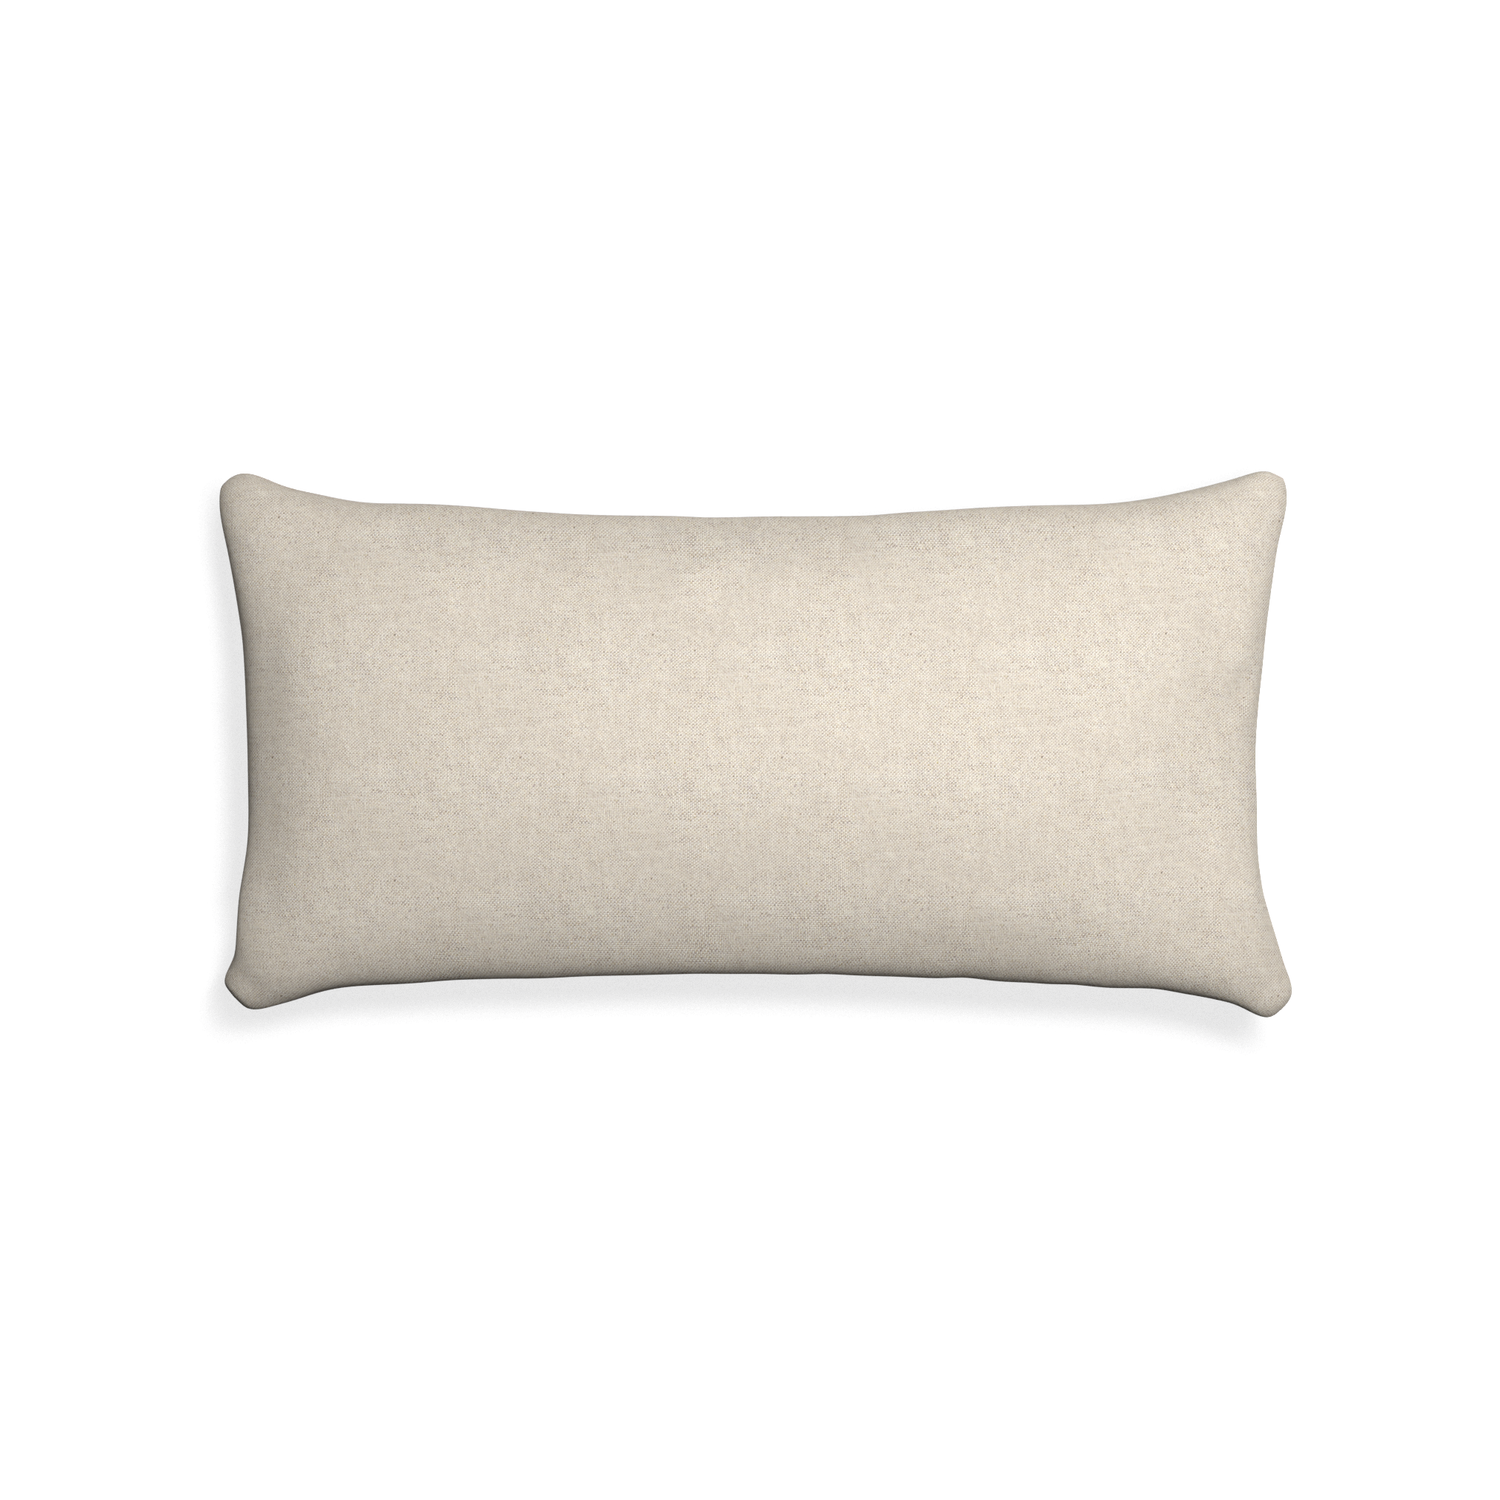 Midi-lumbar oat custom light brownpillow with none on white background